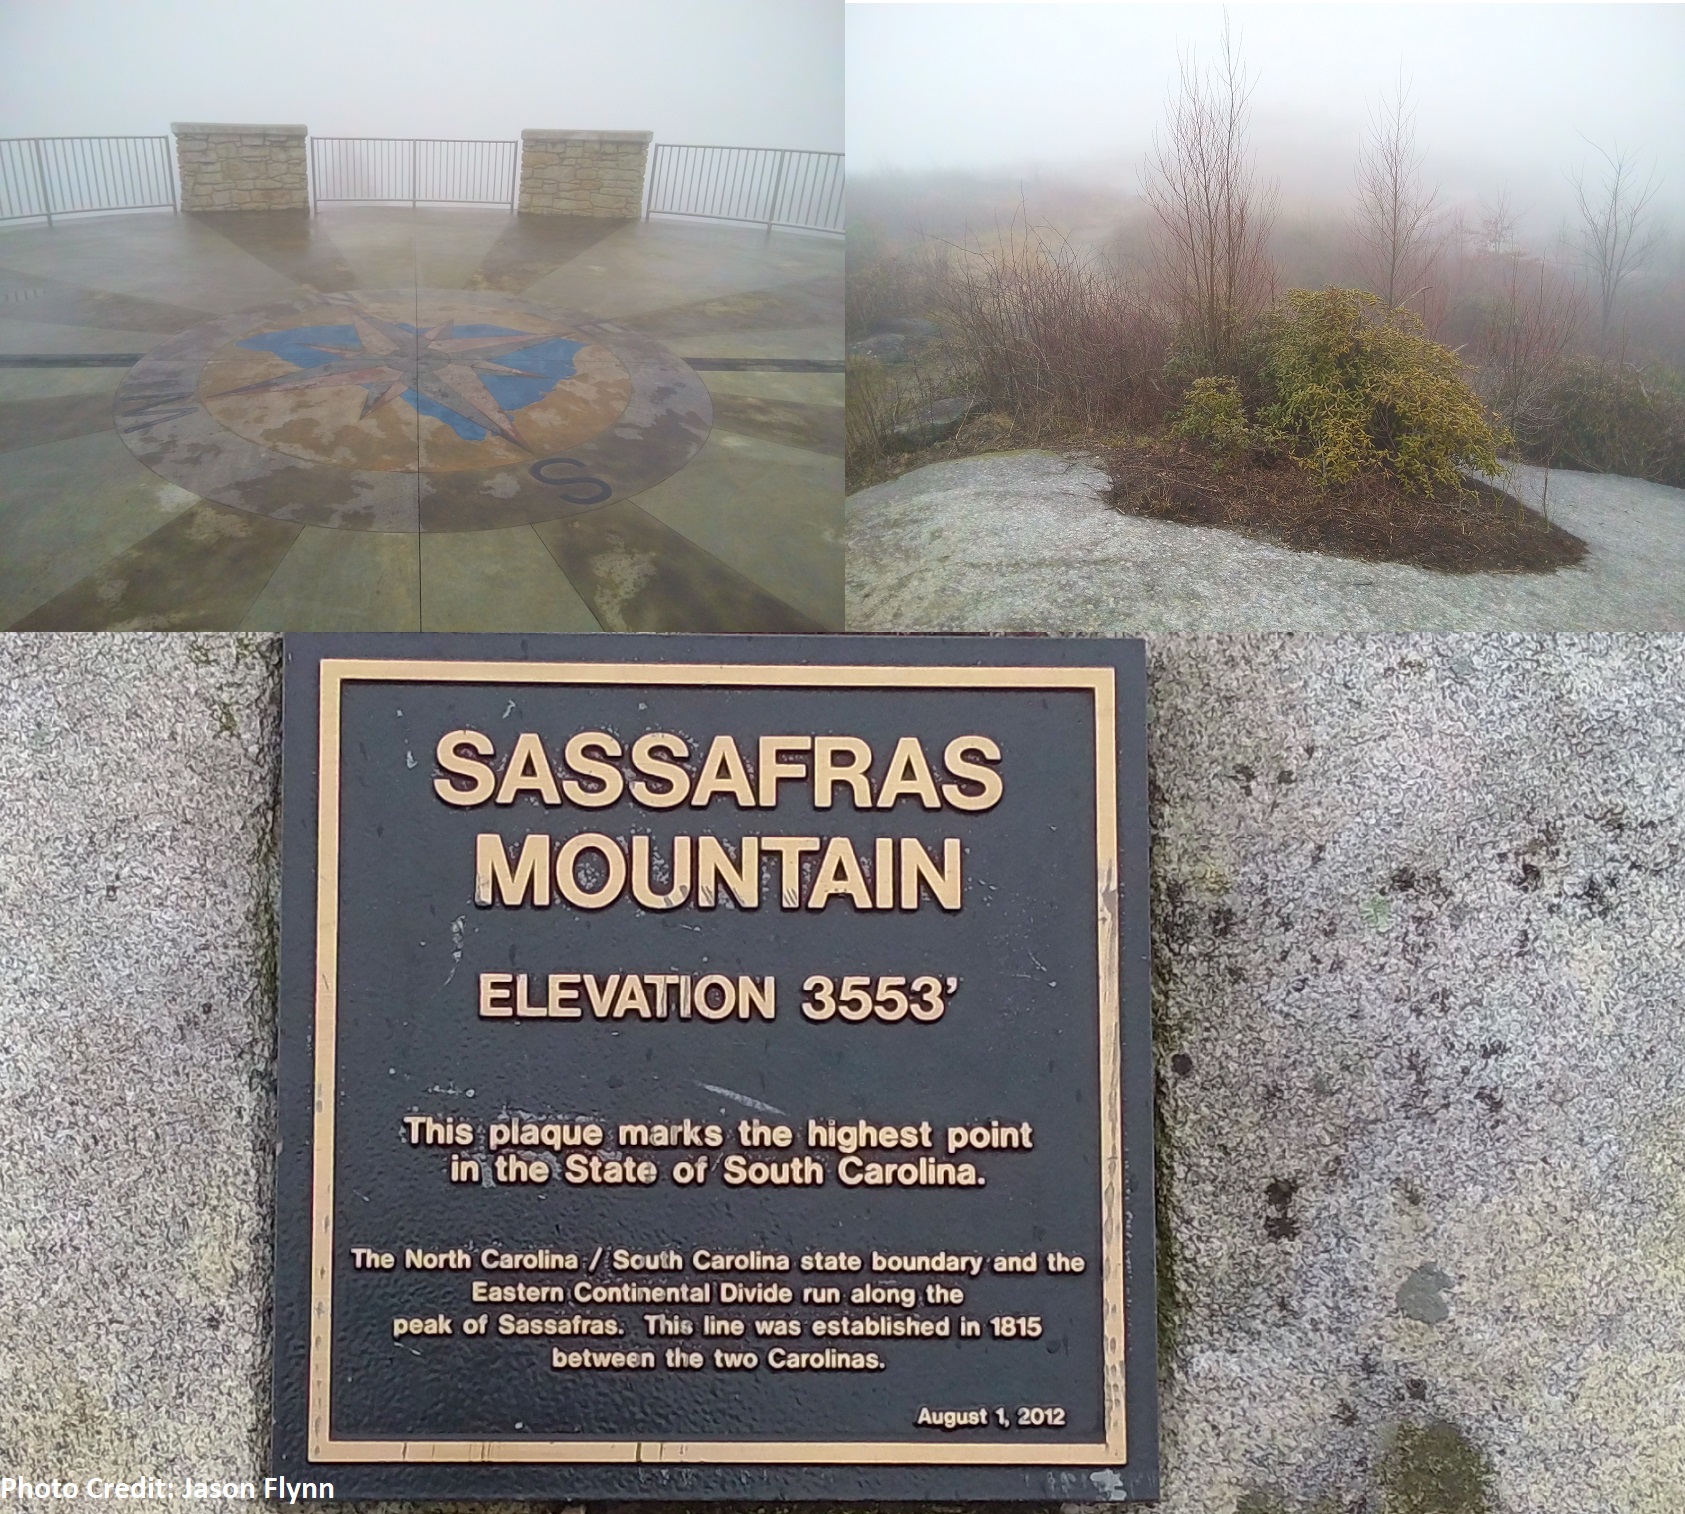 Sassafras mountain – The highest point in SC – The peak shares the border with NC and is composed mostly of the metamorphic rock gneiss. Located in Pickens County it is part of the Inner Piedmont Belt, within the Blue Ridge geographic area of the state.